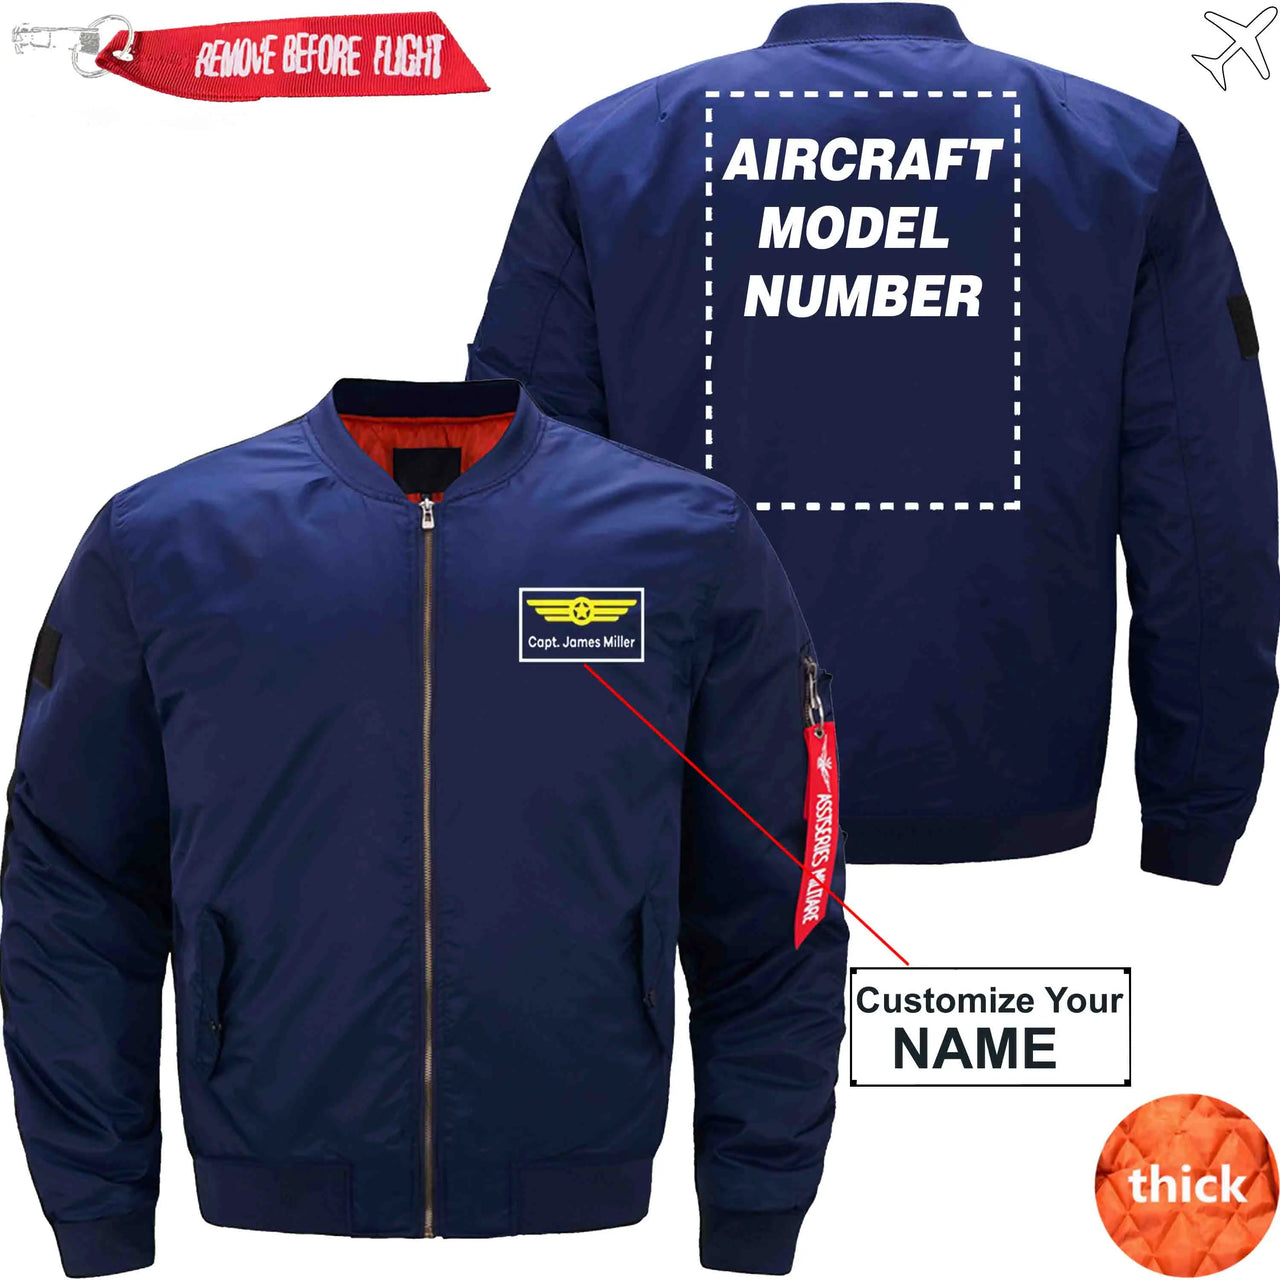 NAME WITH AIRCRAFT MODEL NUMBER - JACKET THE AV8R